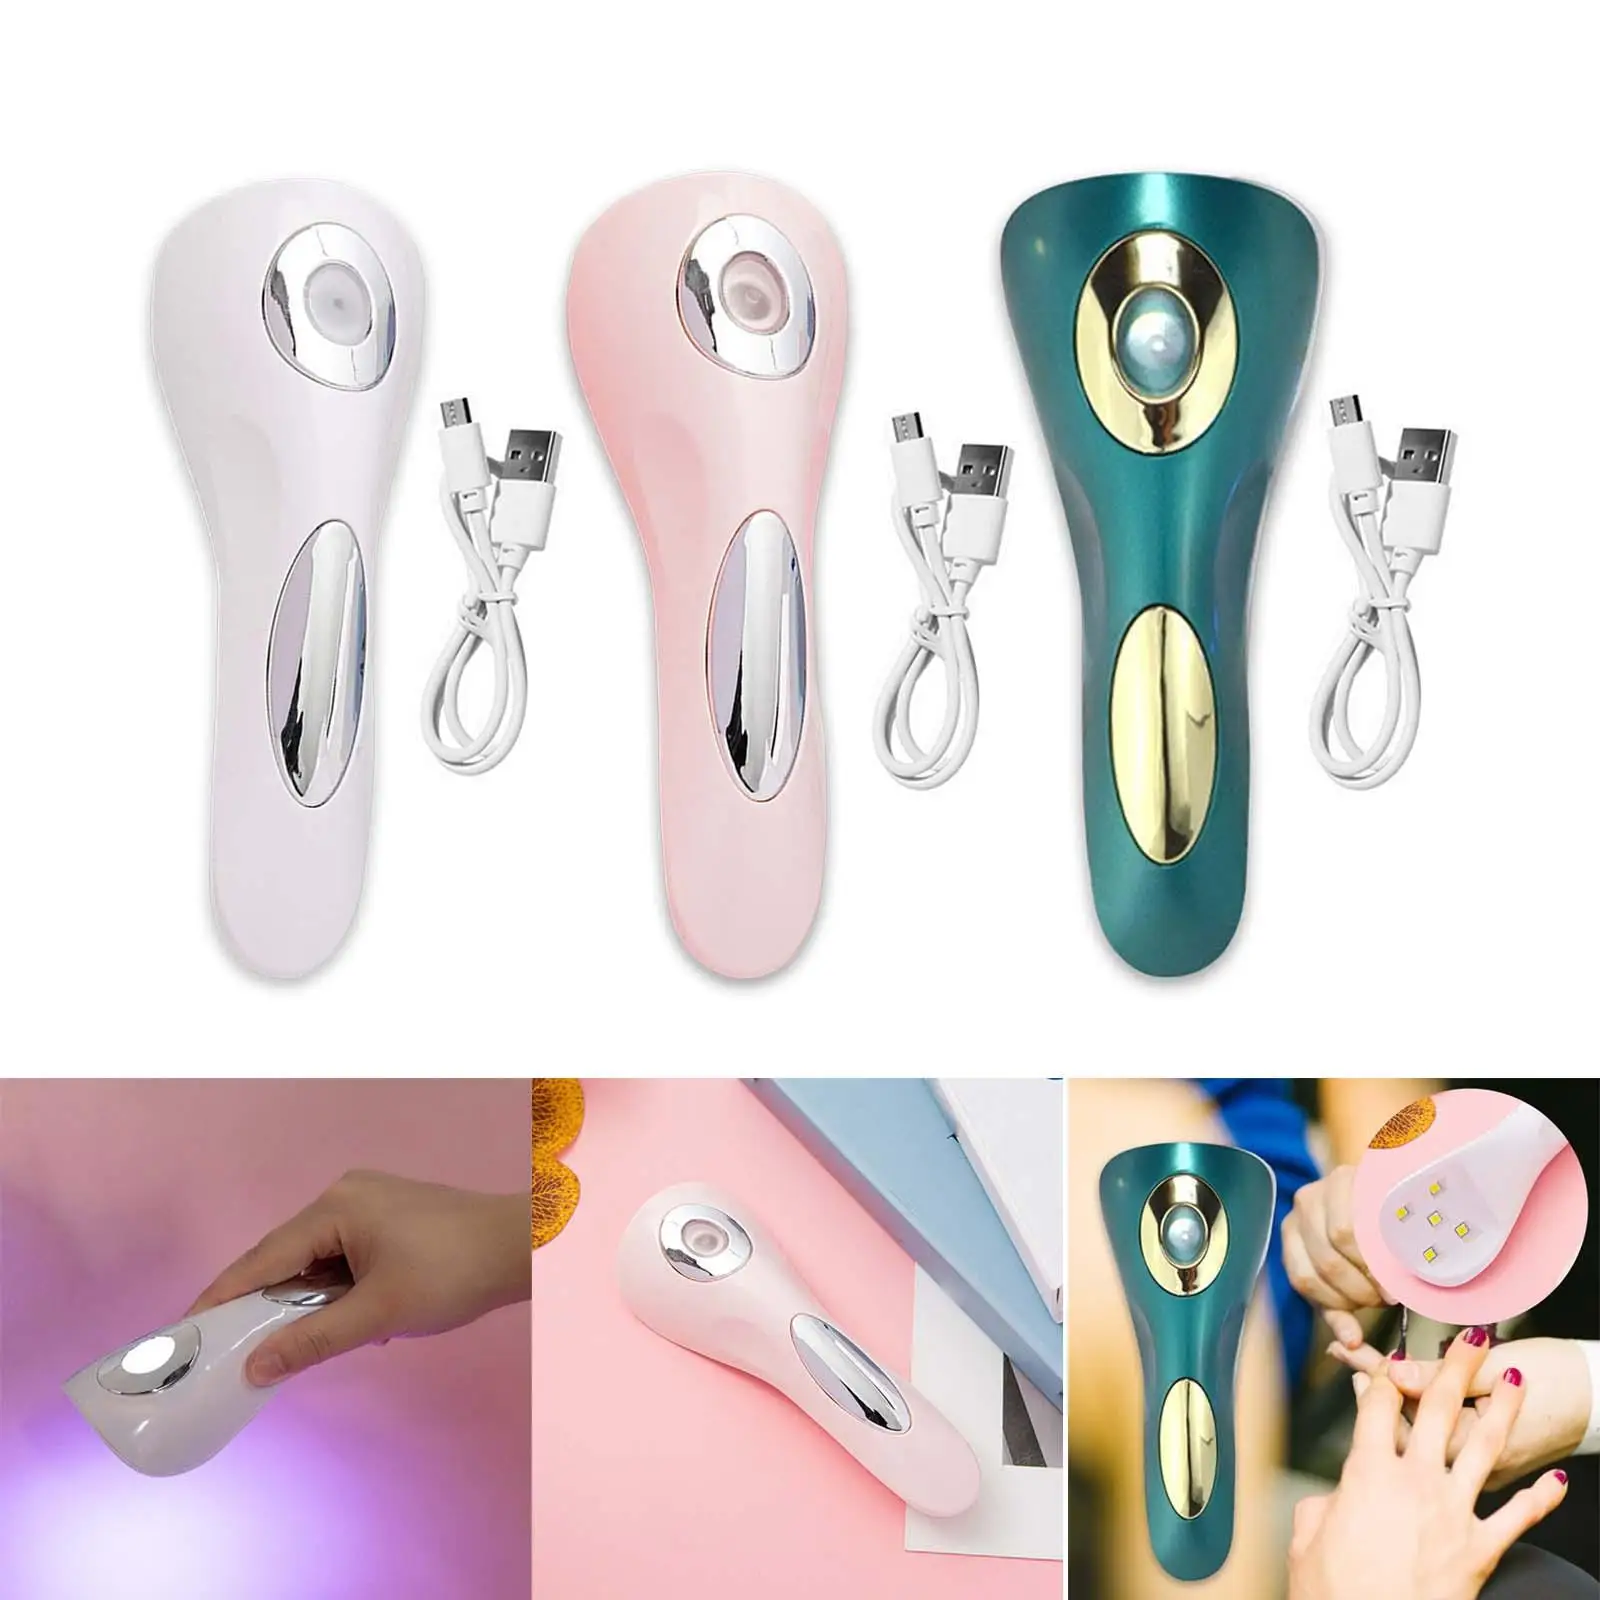 Portable Nail Light Nail Dryer Gel Nails Light Rechargable Professional Nail Art Tools for Women Girls Female Gifts